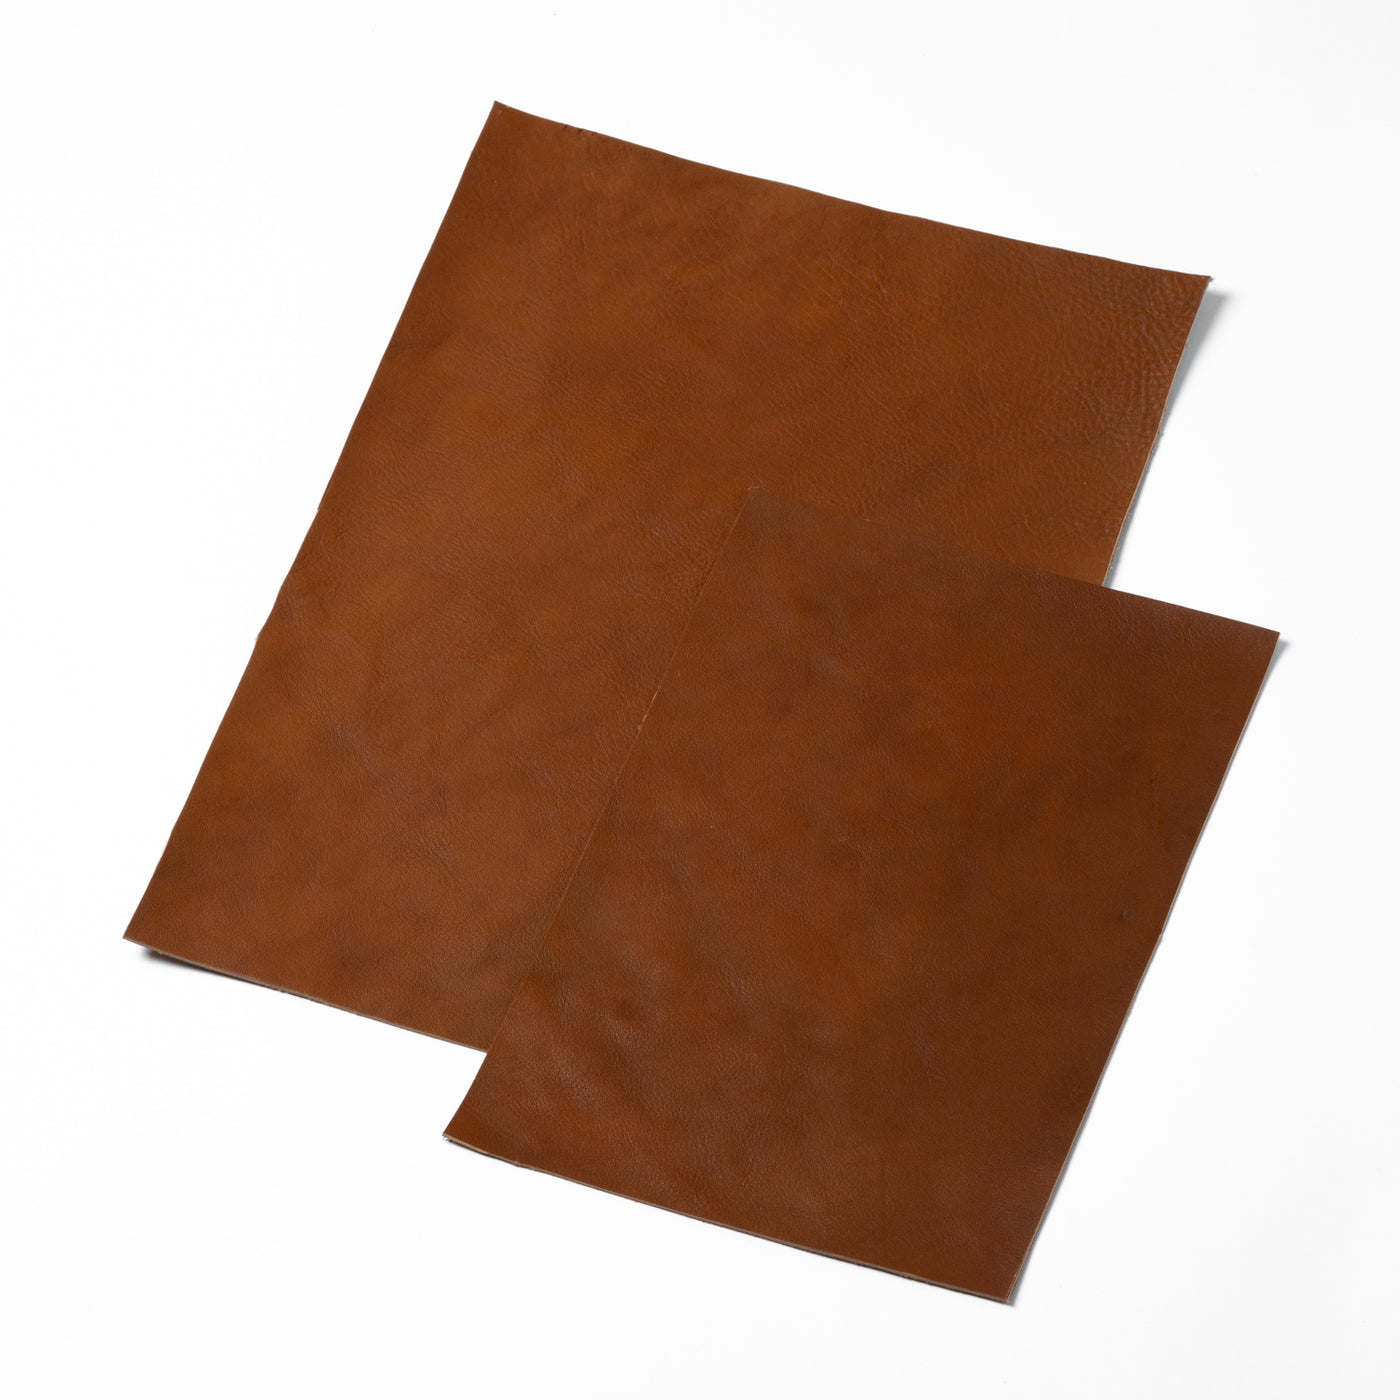 Tanned/shrunk leather A3